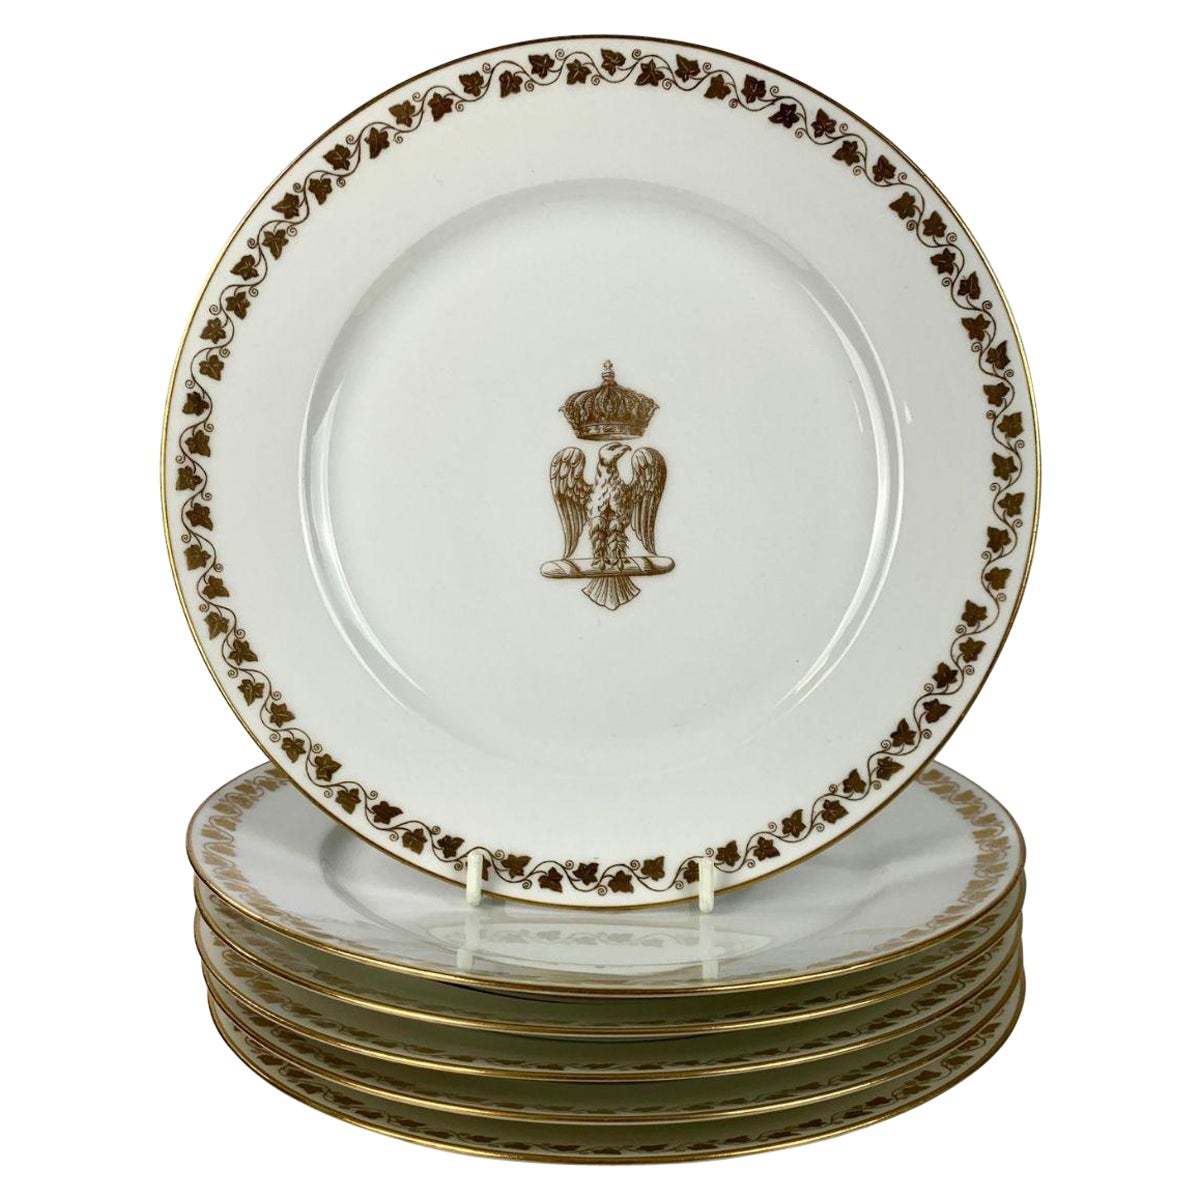 Set Six Dinner Plates w/ Napoleonic Imperial Eagle in Style of Sèvres